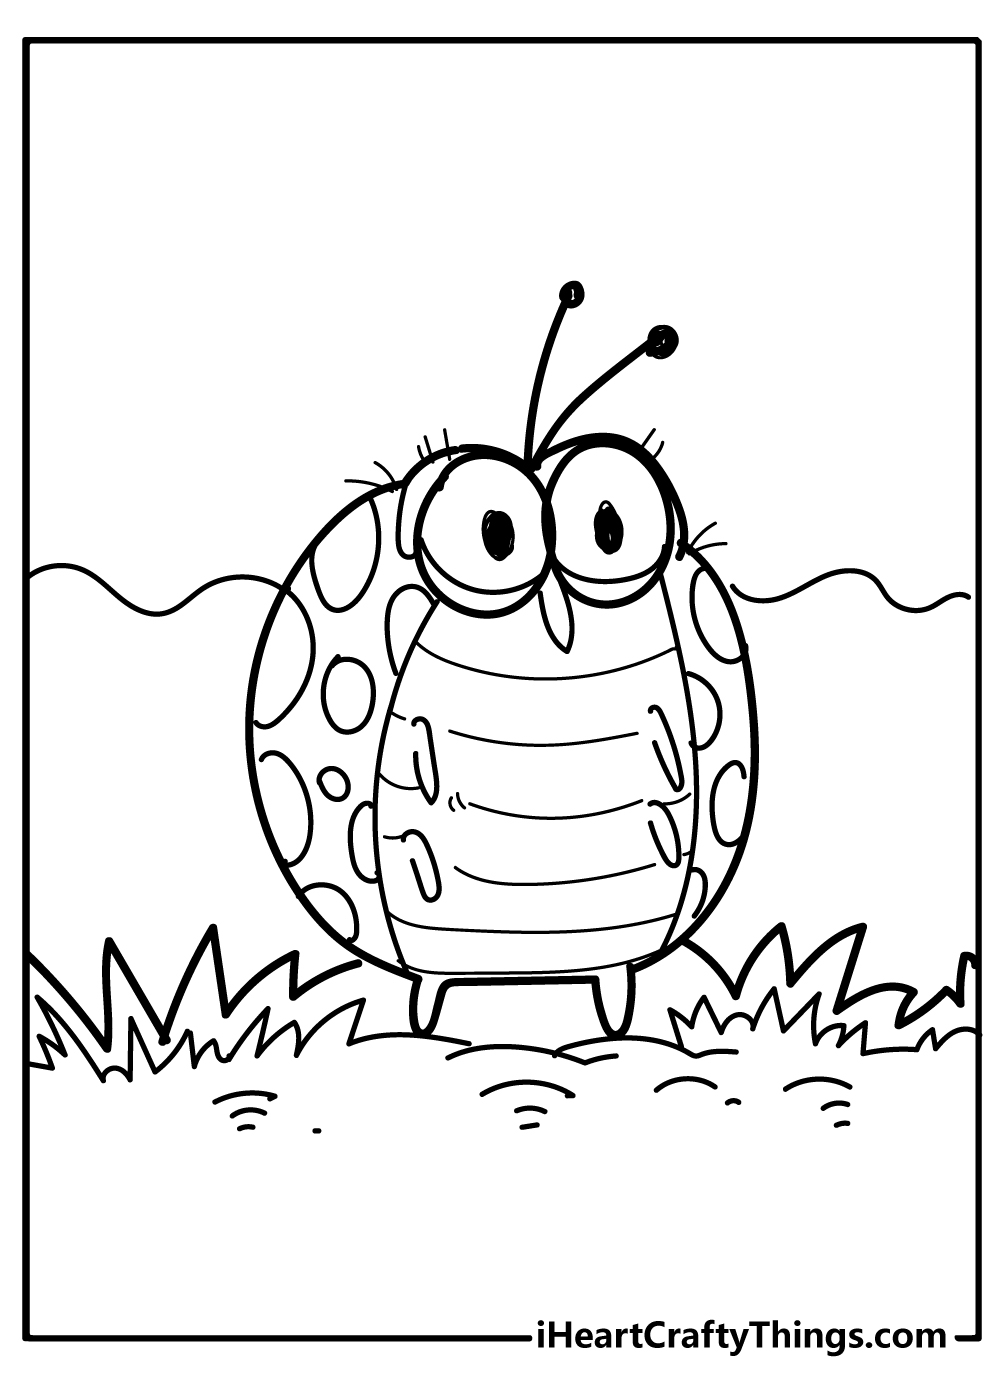 Bug Coloring Sheet for children free download